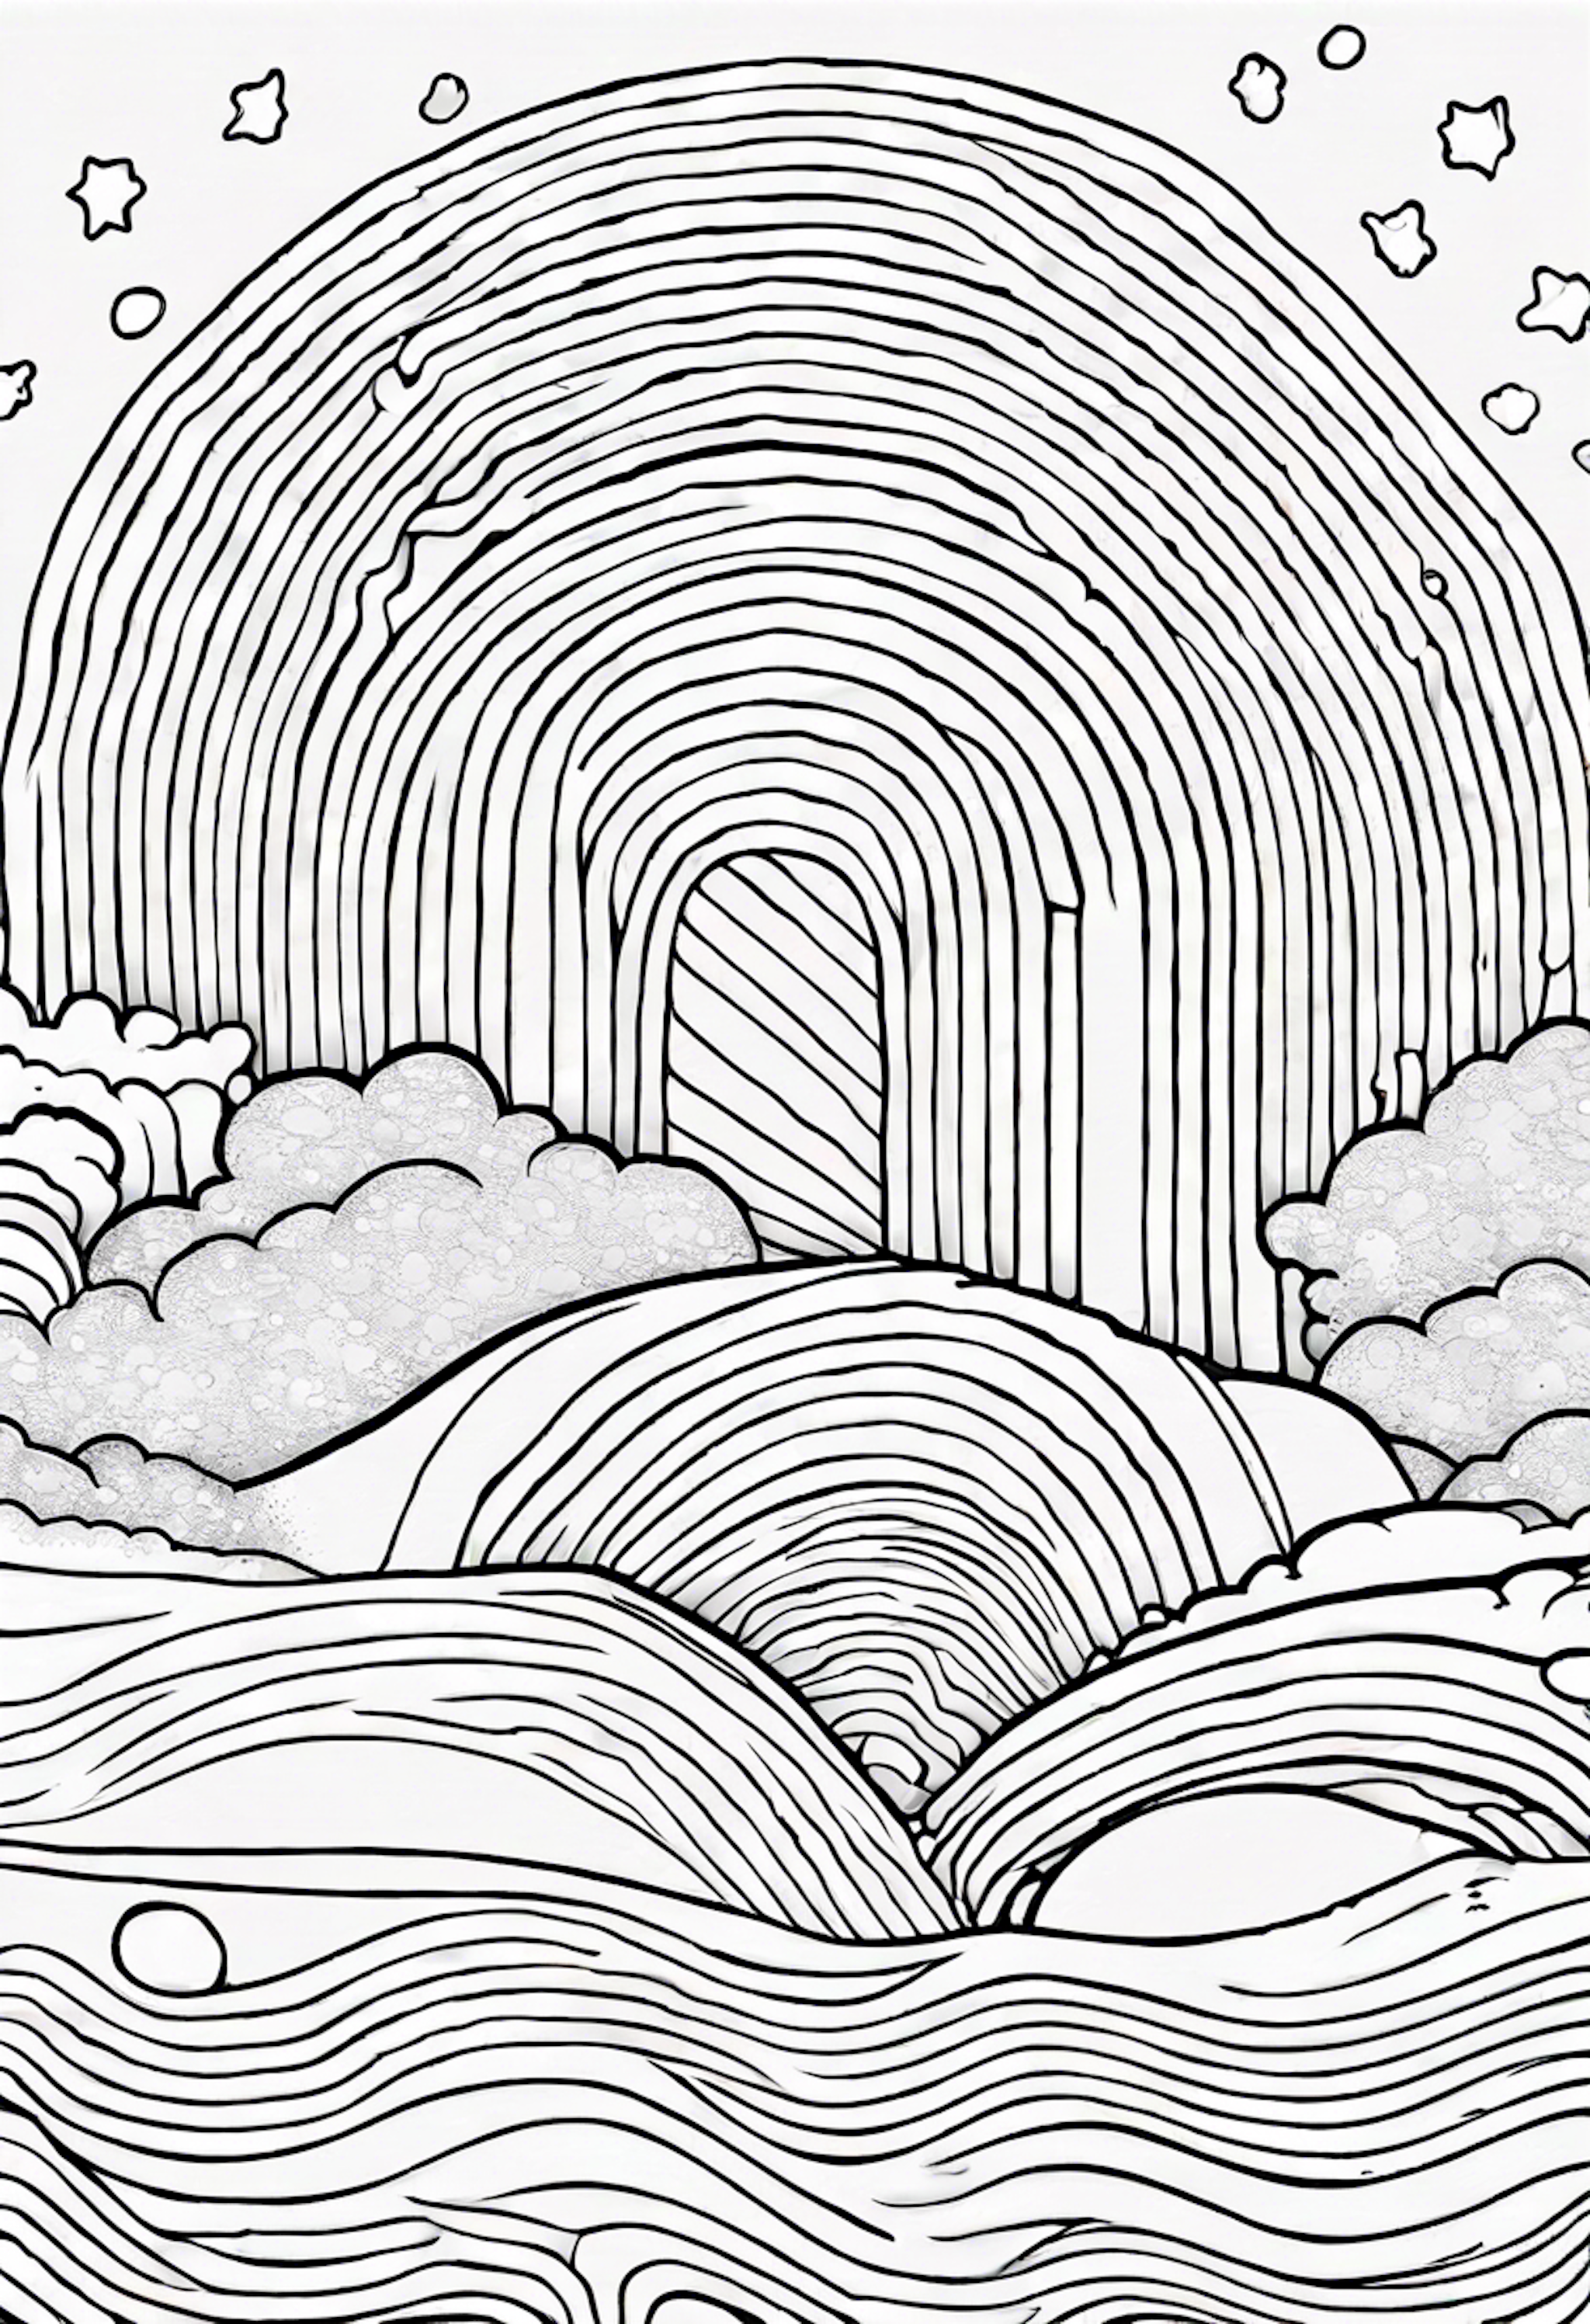 A coloring page for 1 Rainbow High coloring pages